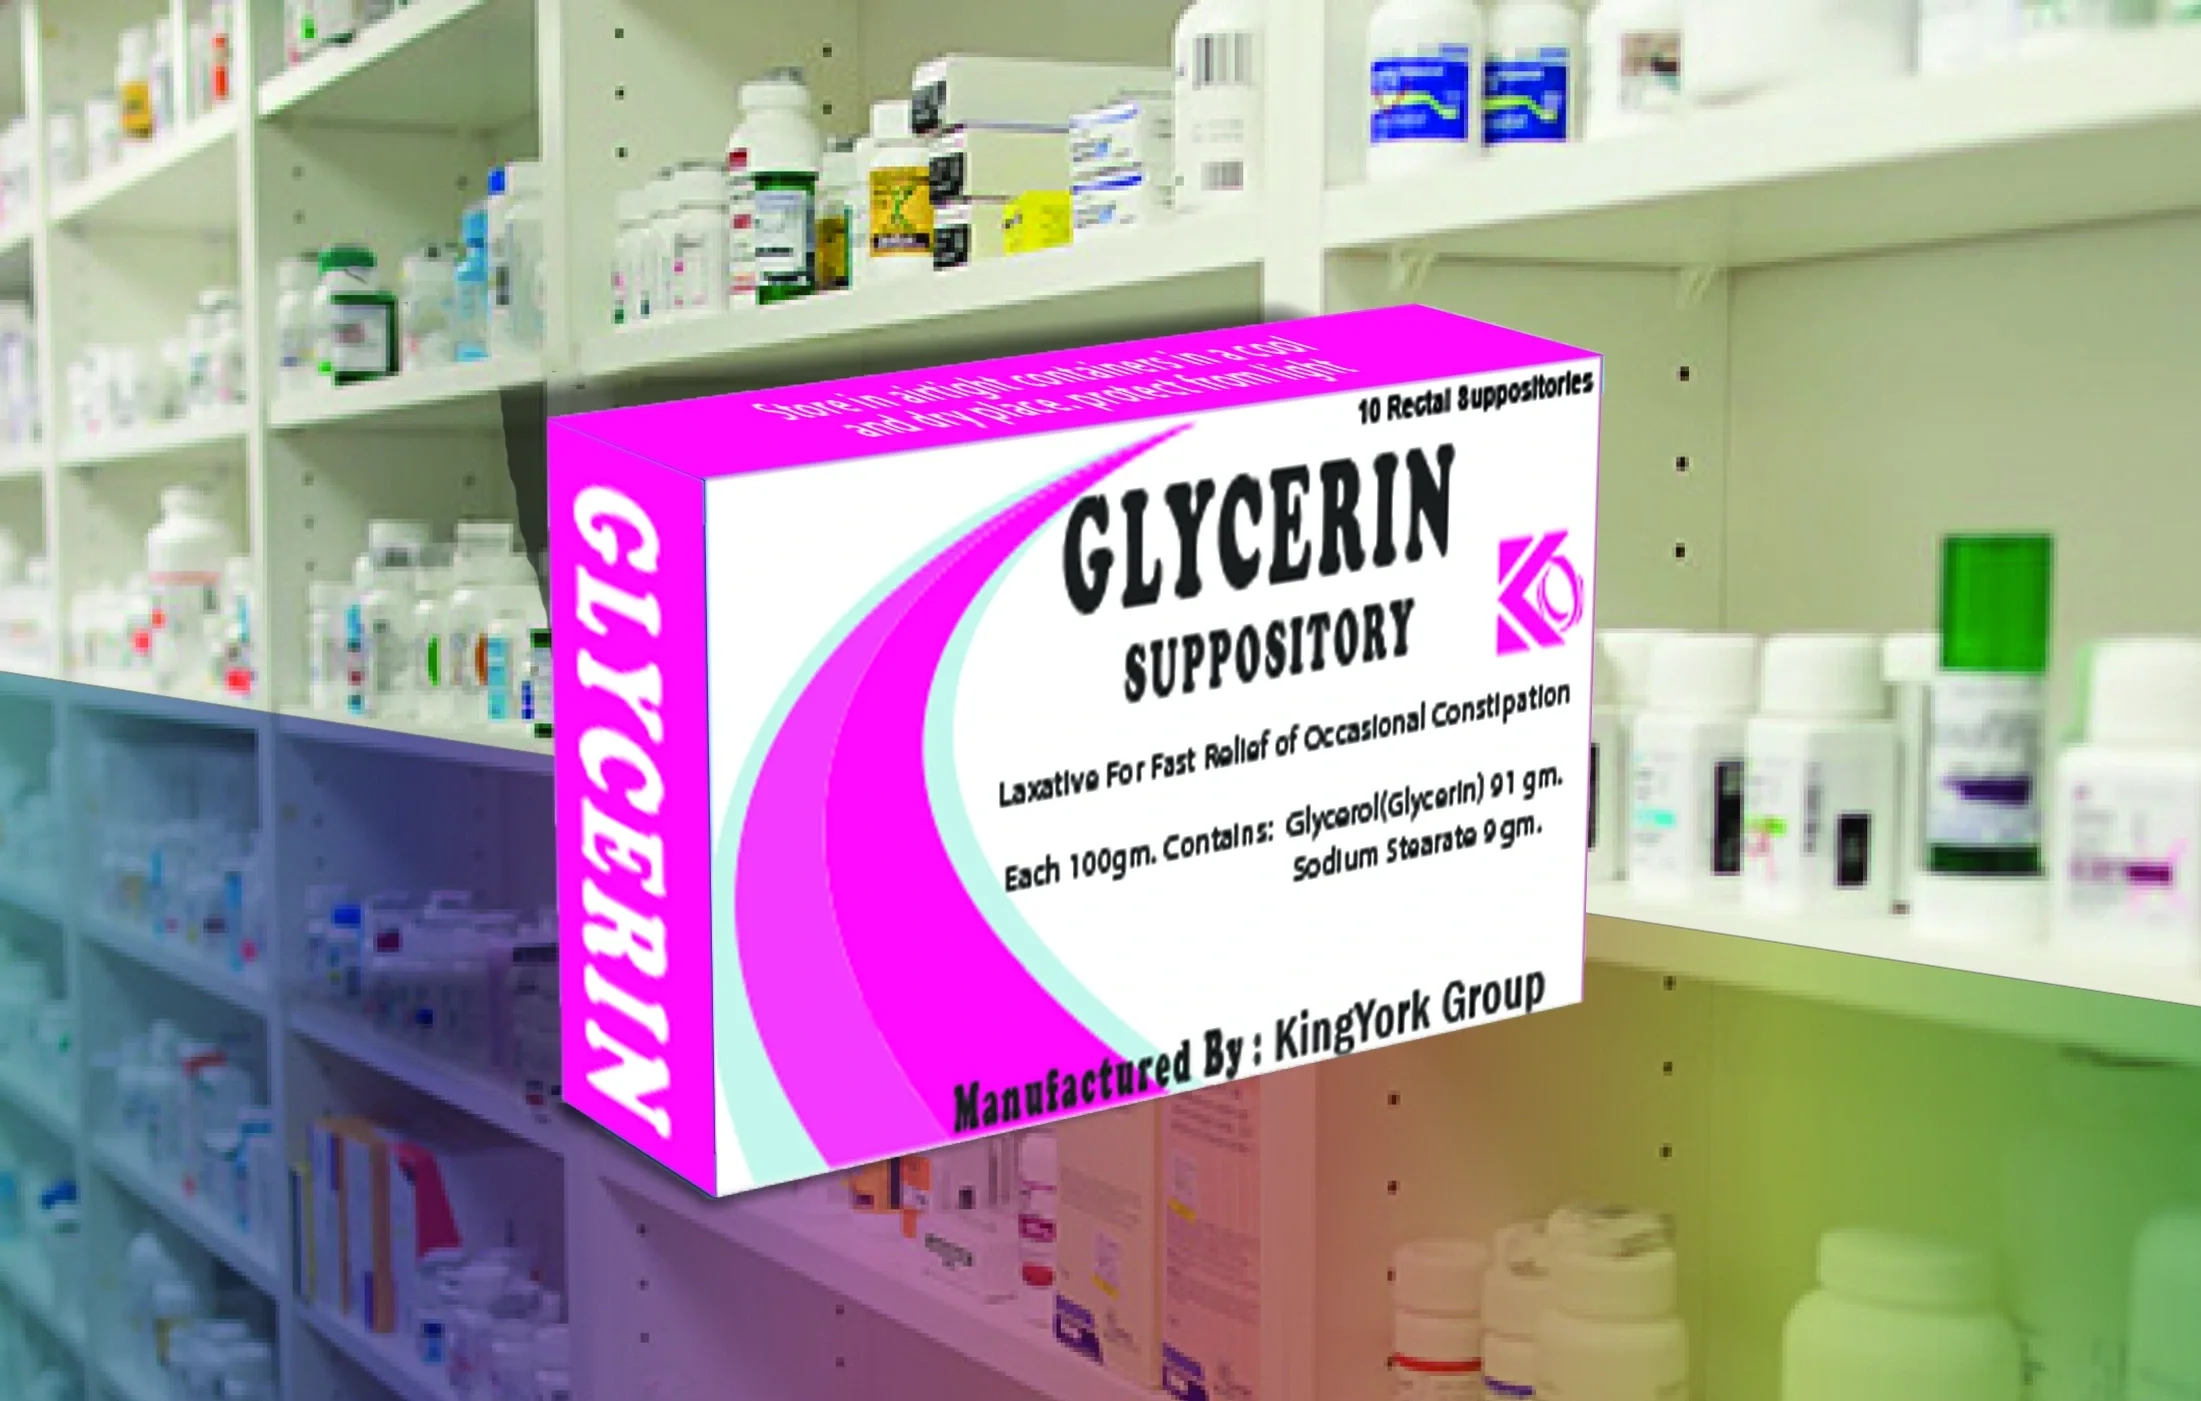 'glycerin suppository', 'analgesic suppository', 'glycerin suppository'